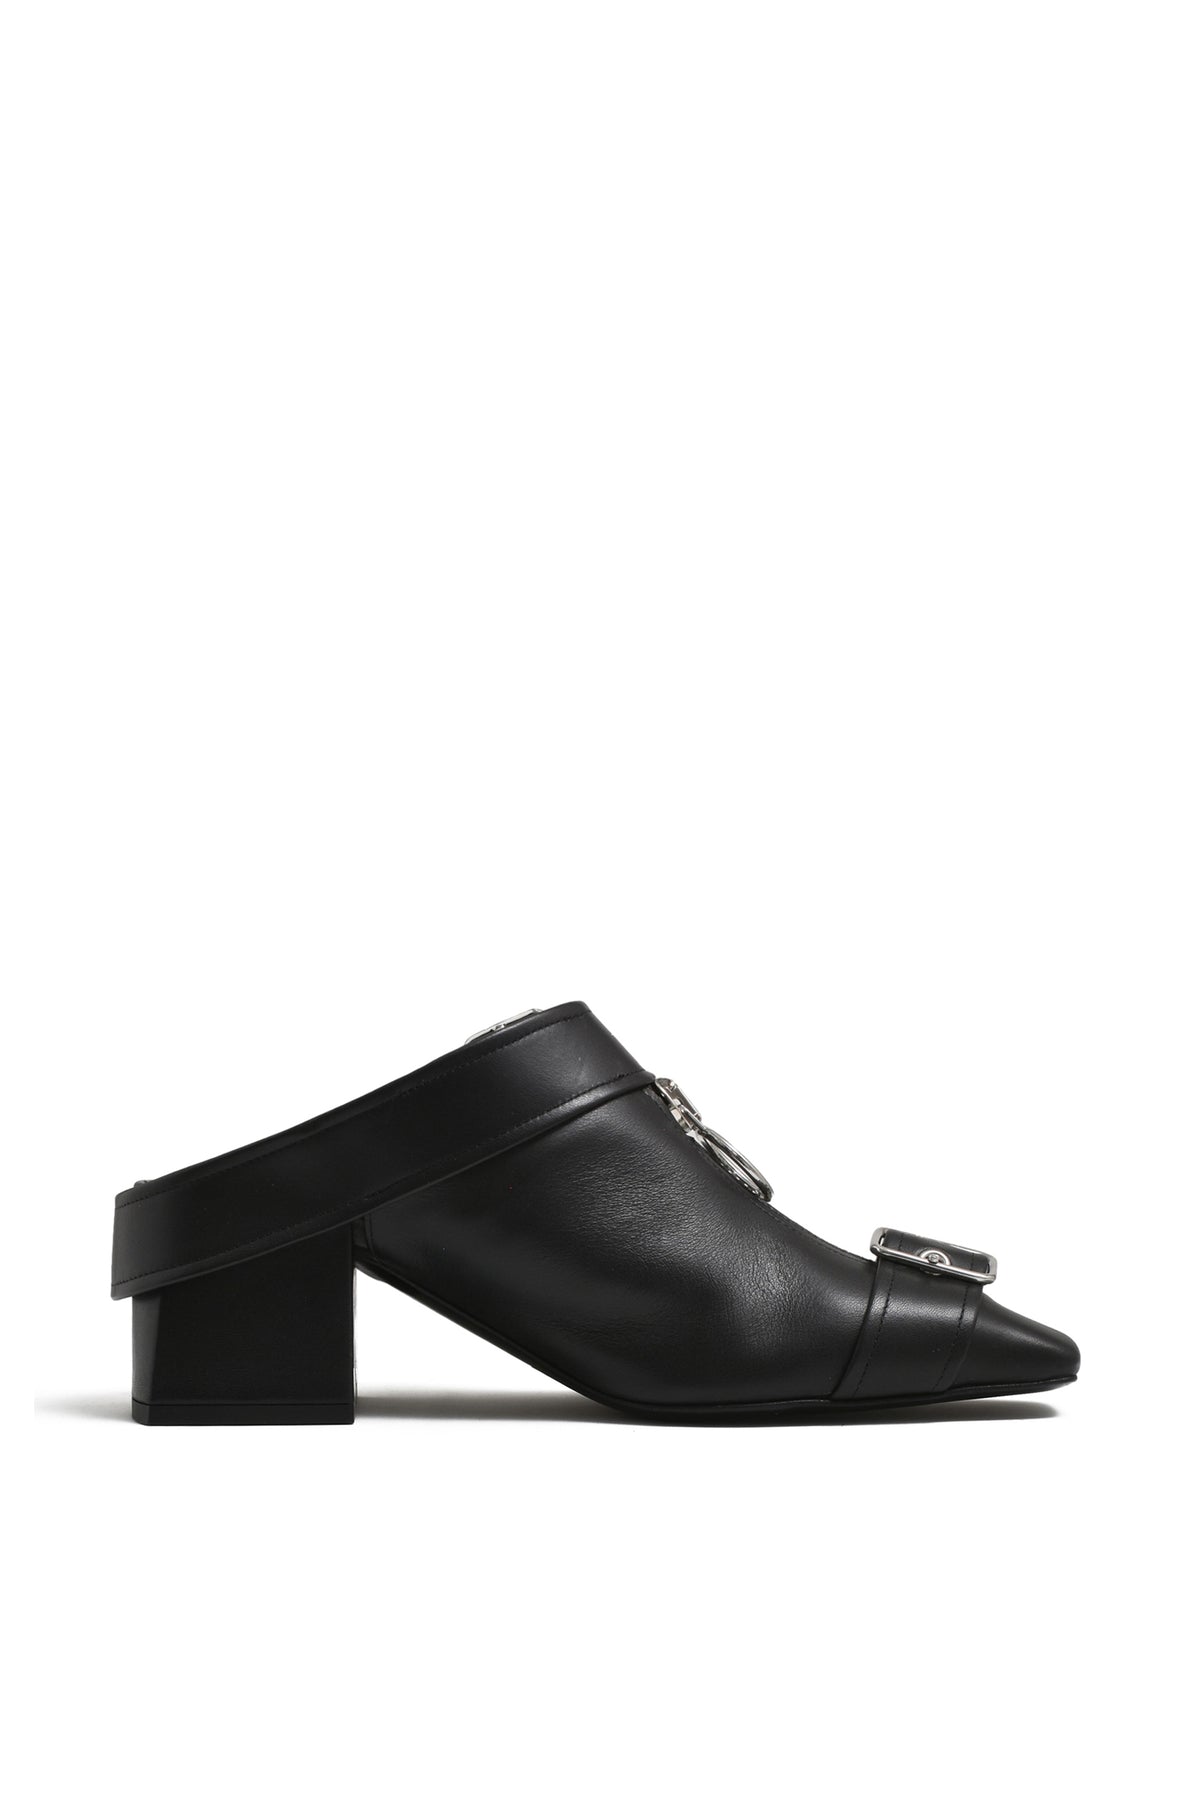 GOGO LEATHER MULES / BLK